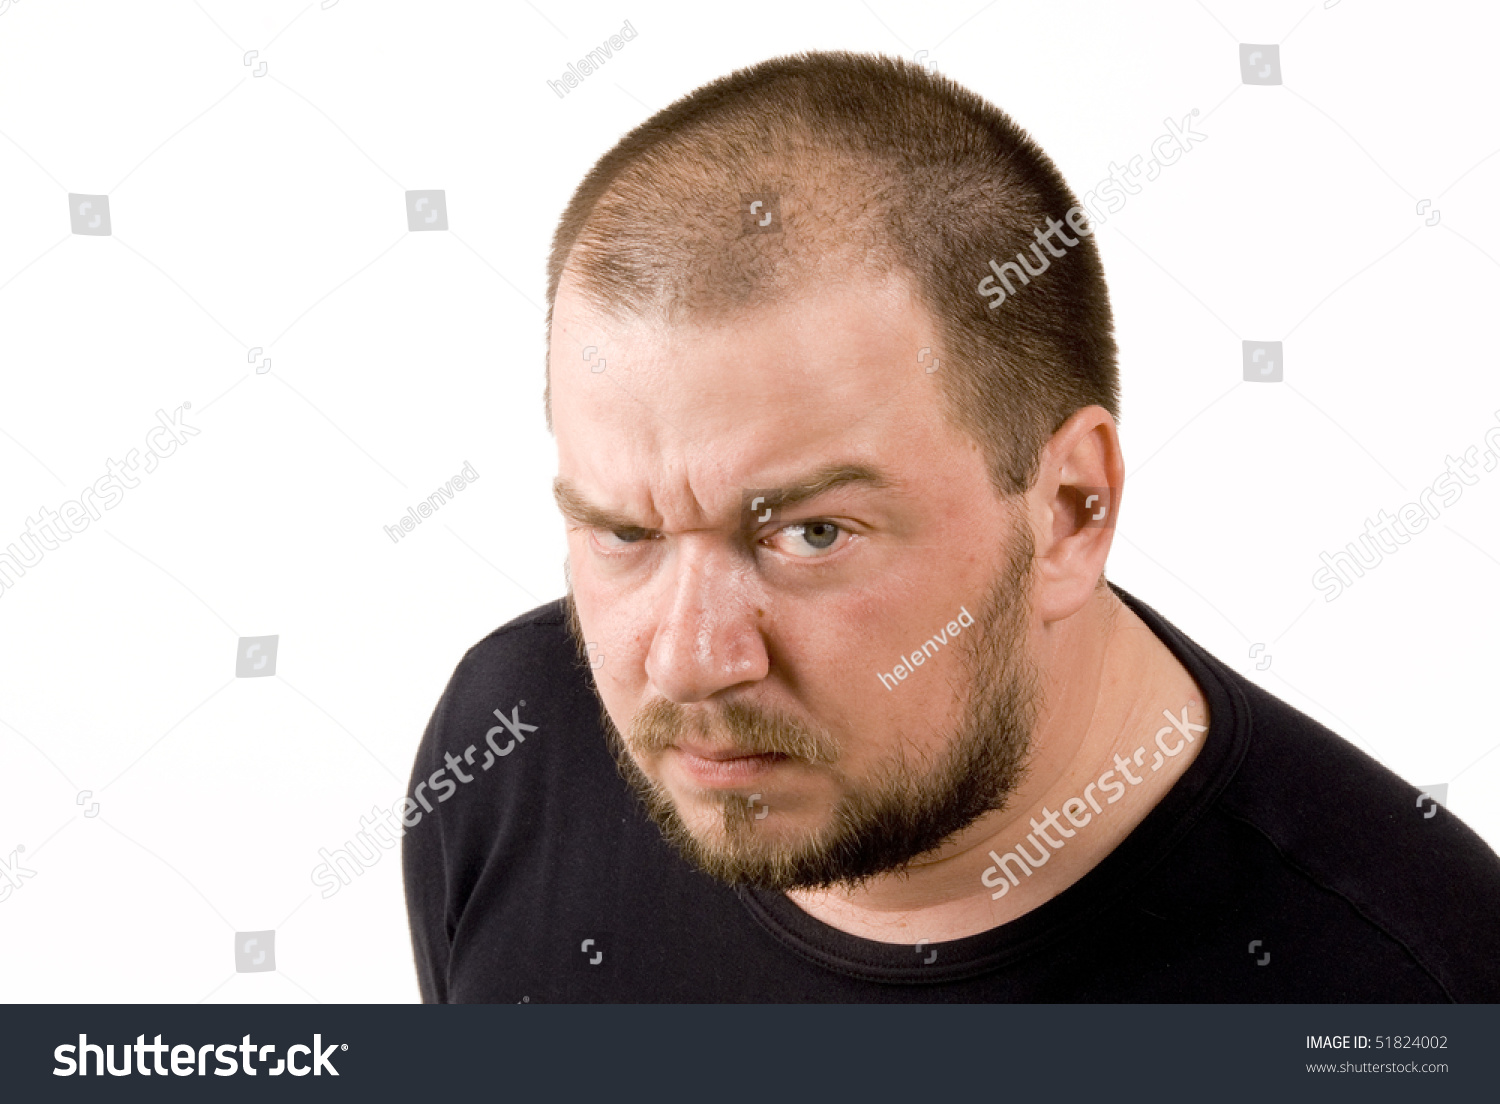 Angry Person Stock Photo 51824002 - Shutterstock